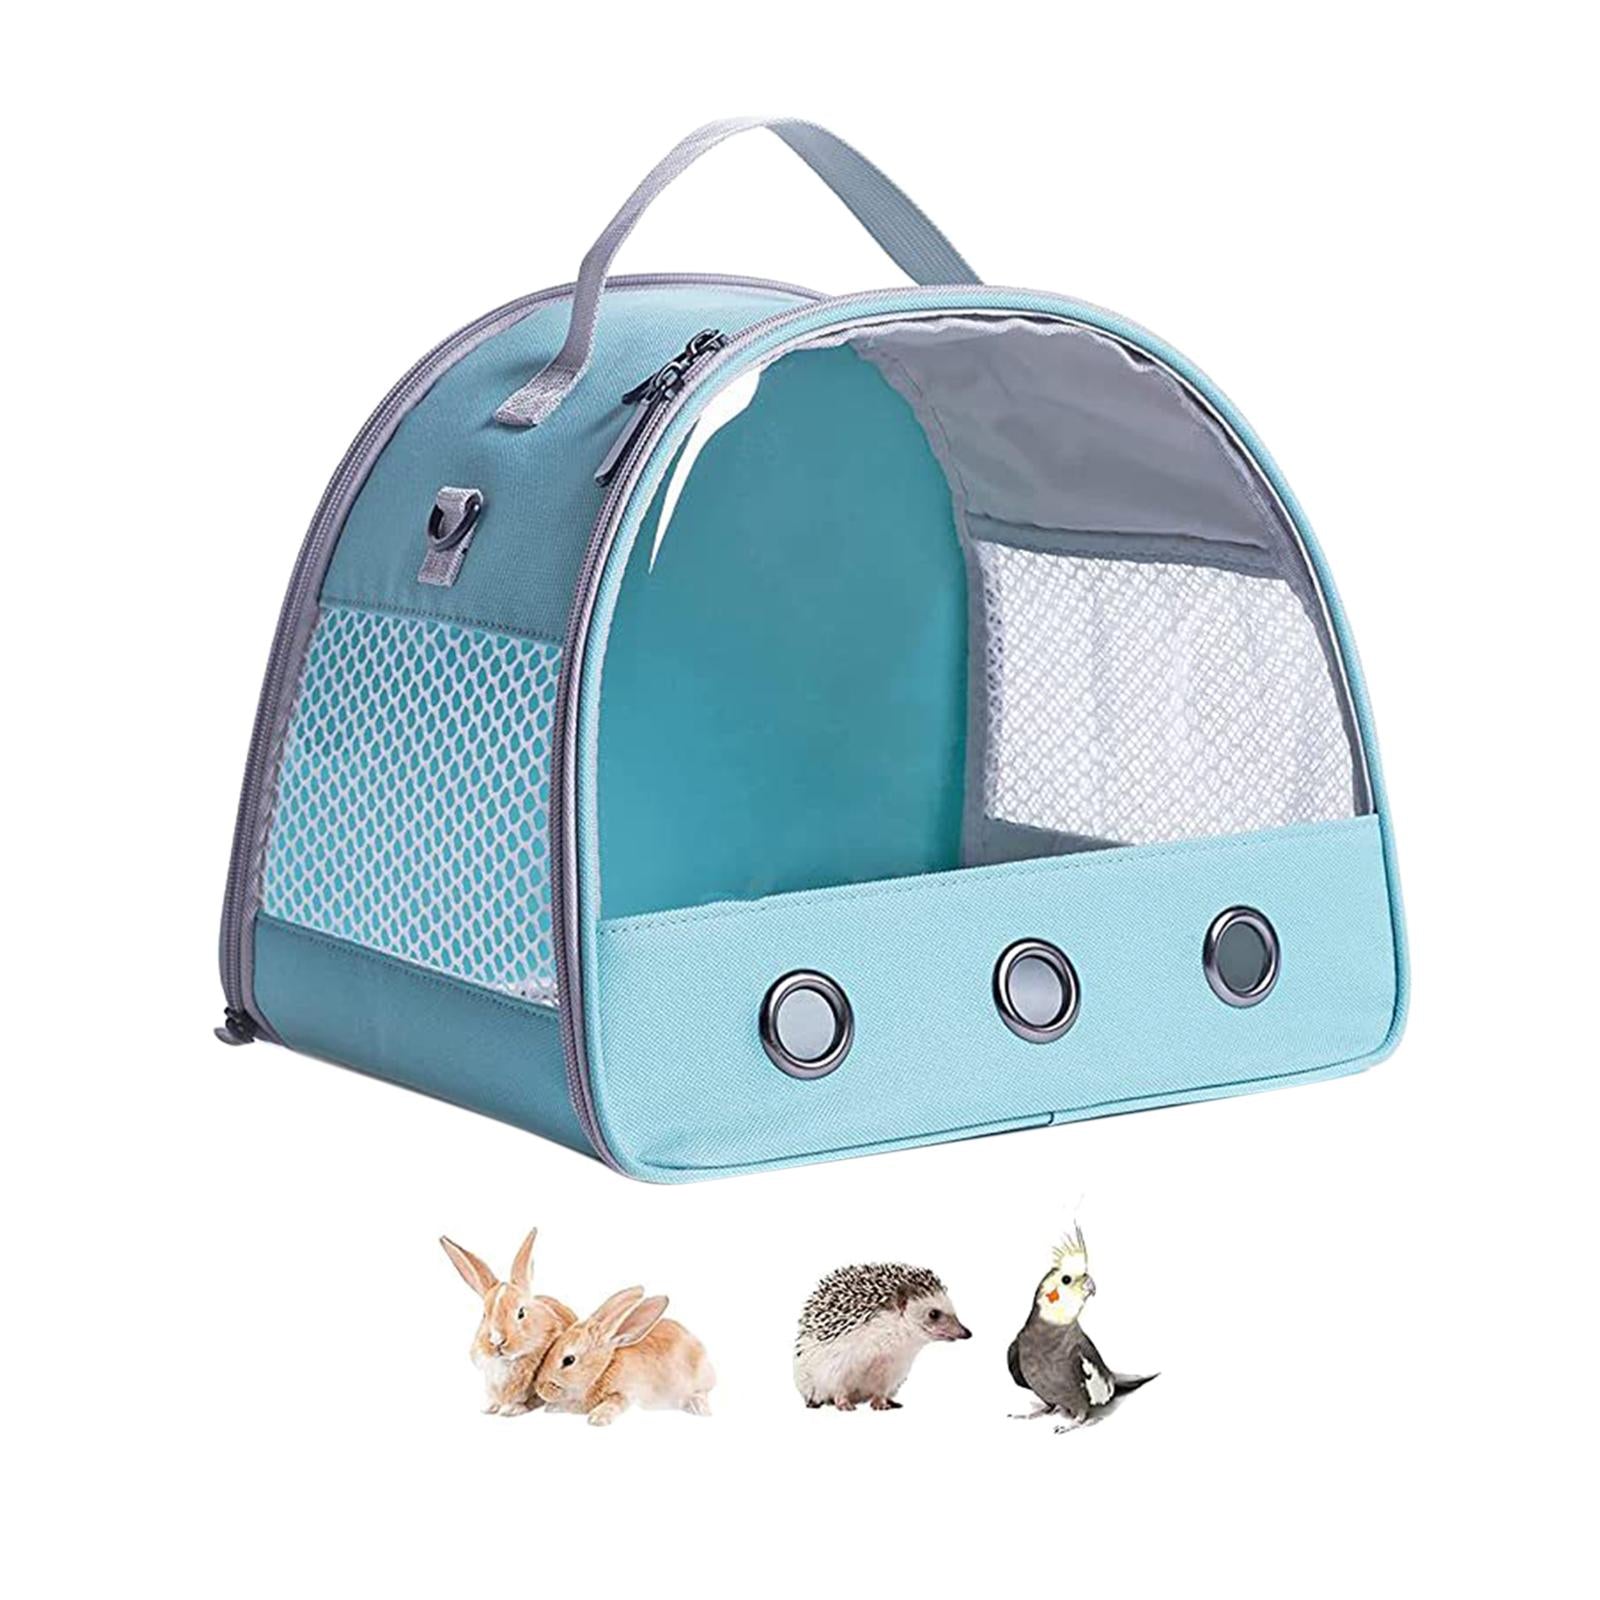 Pet Carrier Backpack for Dogs and Cats,,Fully Ventilated Mesh Designed for Travel Hiking, Walking Outdoor